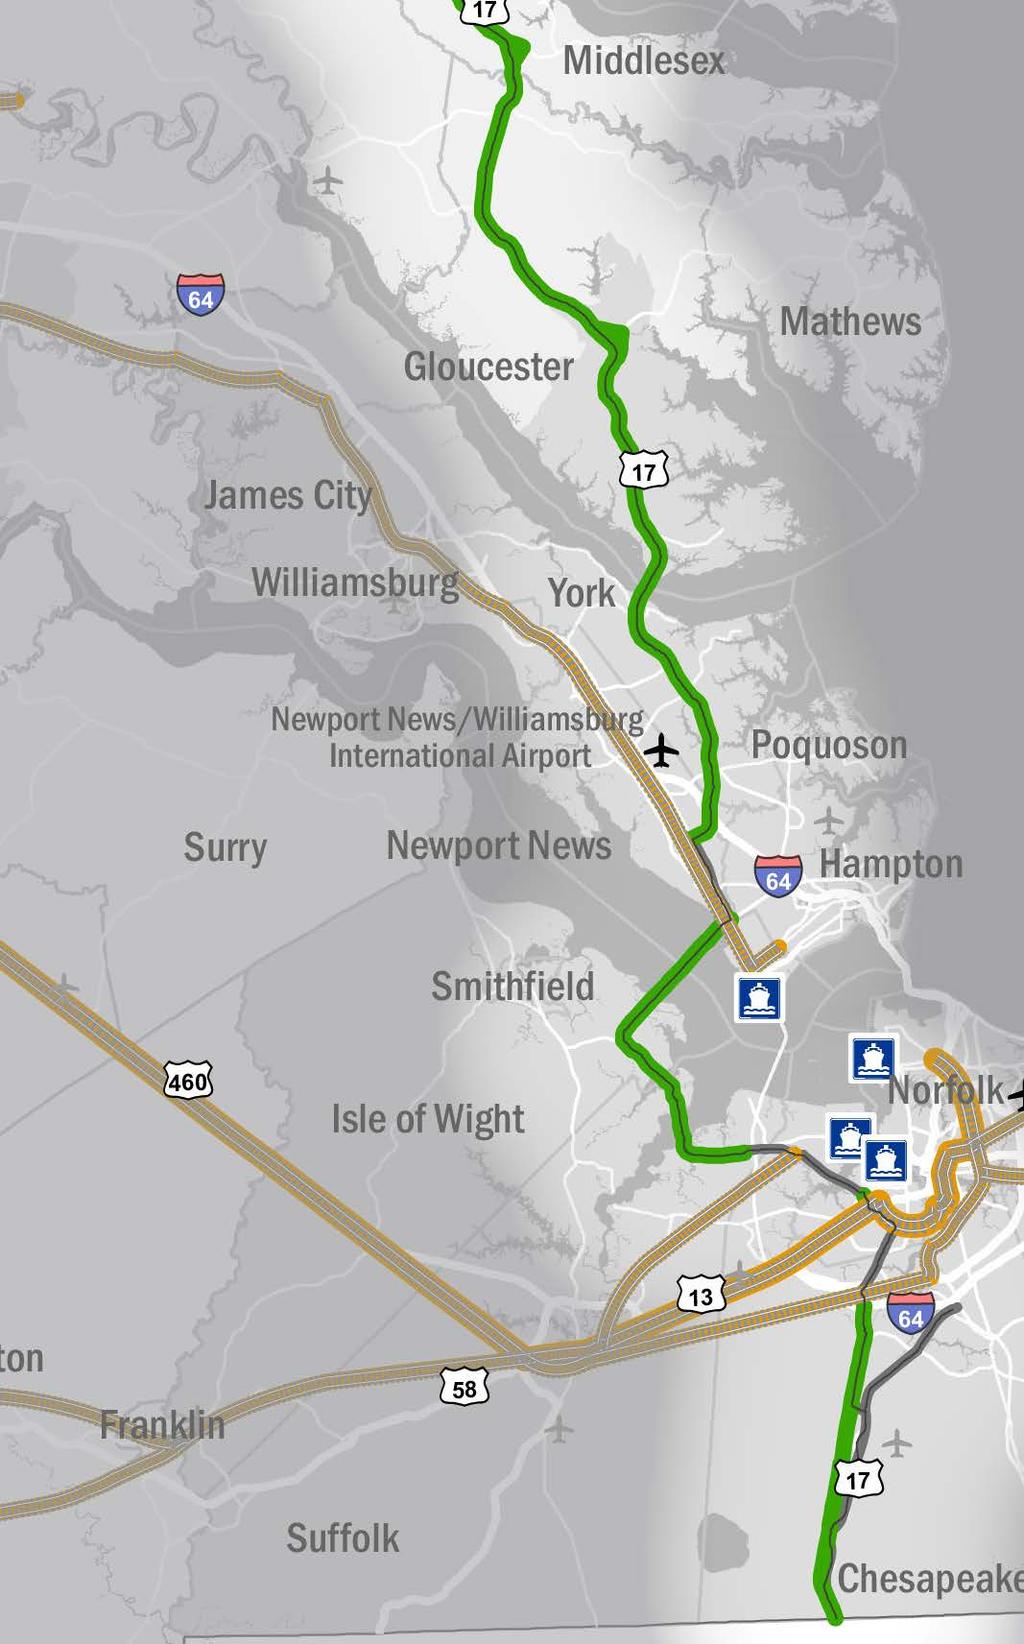 A1 SEGMENT PROFILE Annual Freight by Tonnage, 2012 Freight Flows In Segment A1 of the Coastal Corridor, proximity to the Port of Virginia influences whether freight is moved by truck or rail.